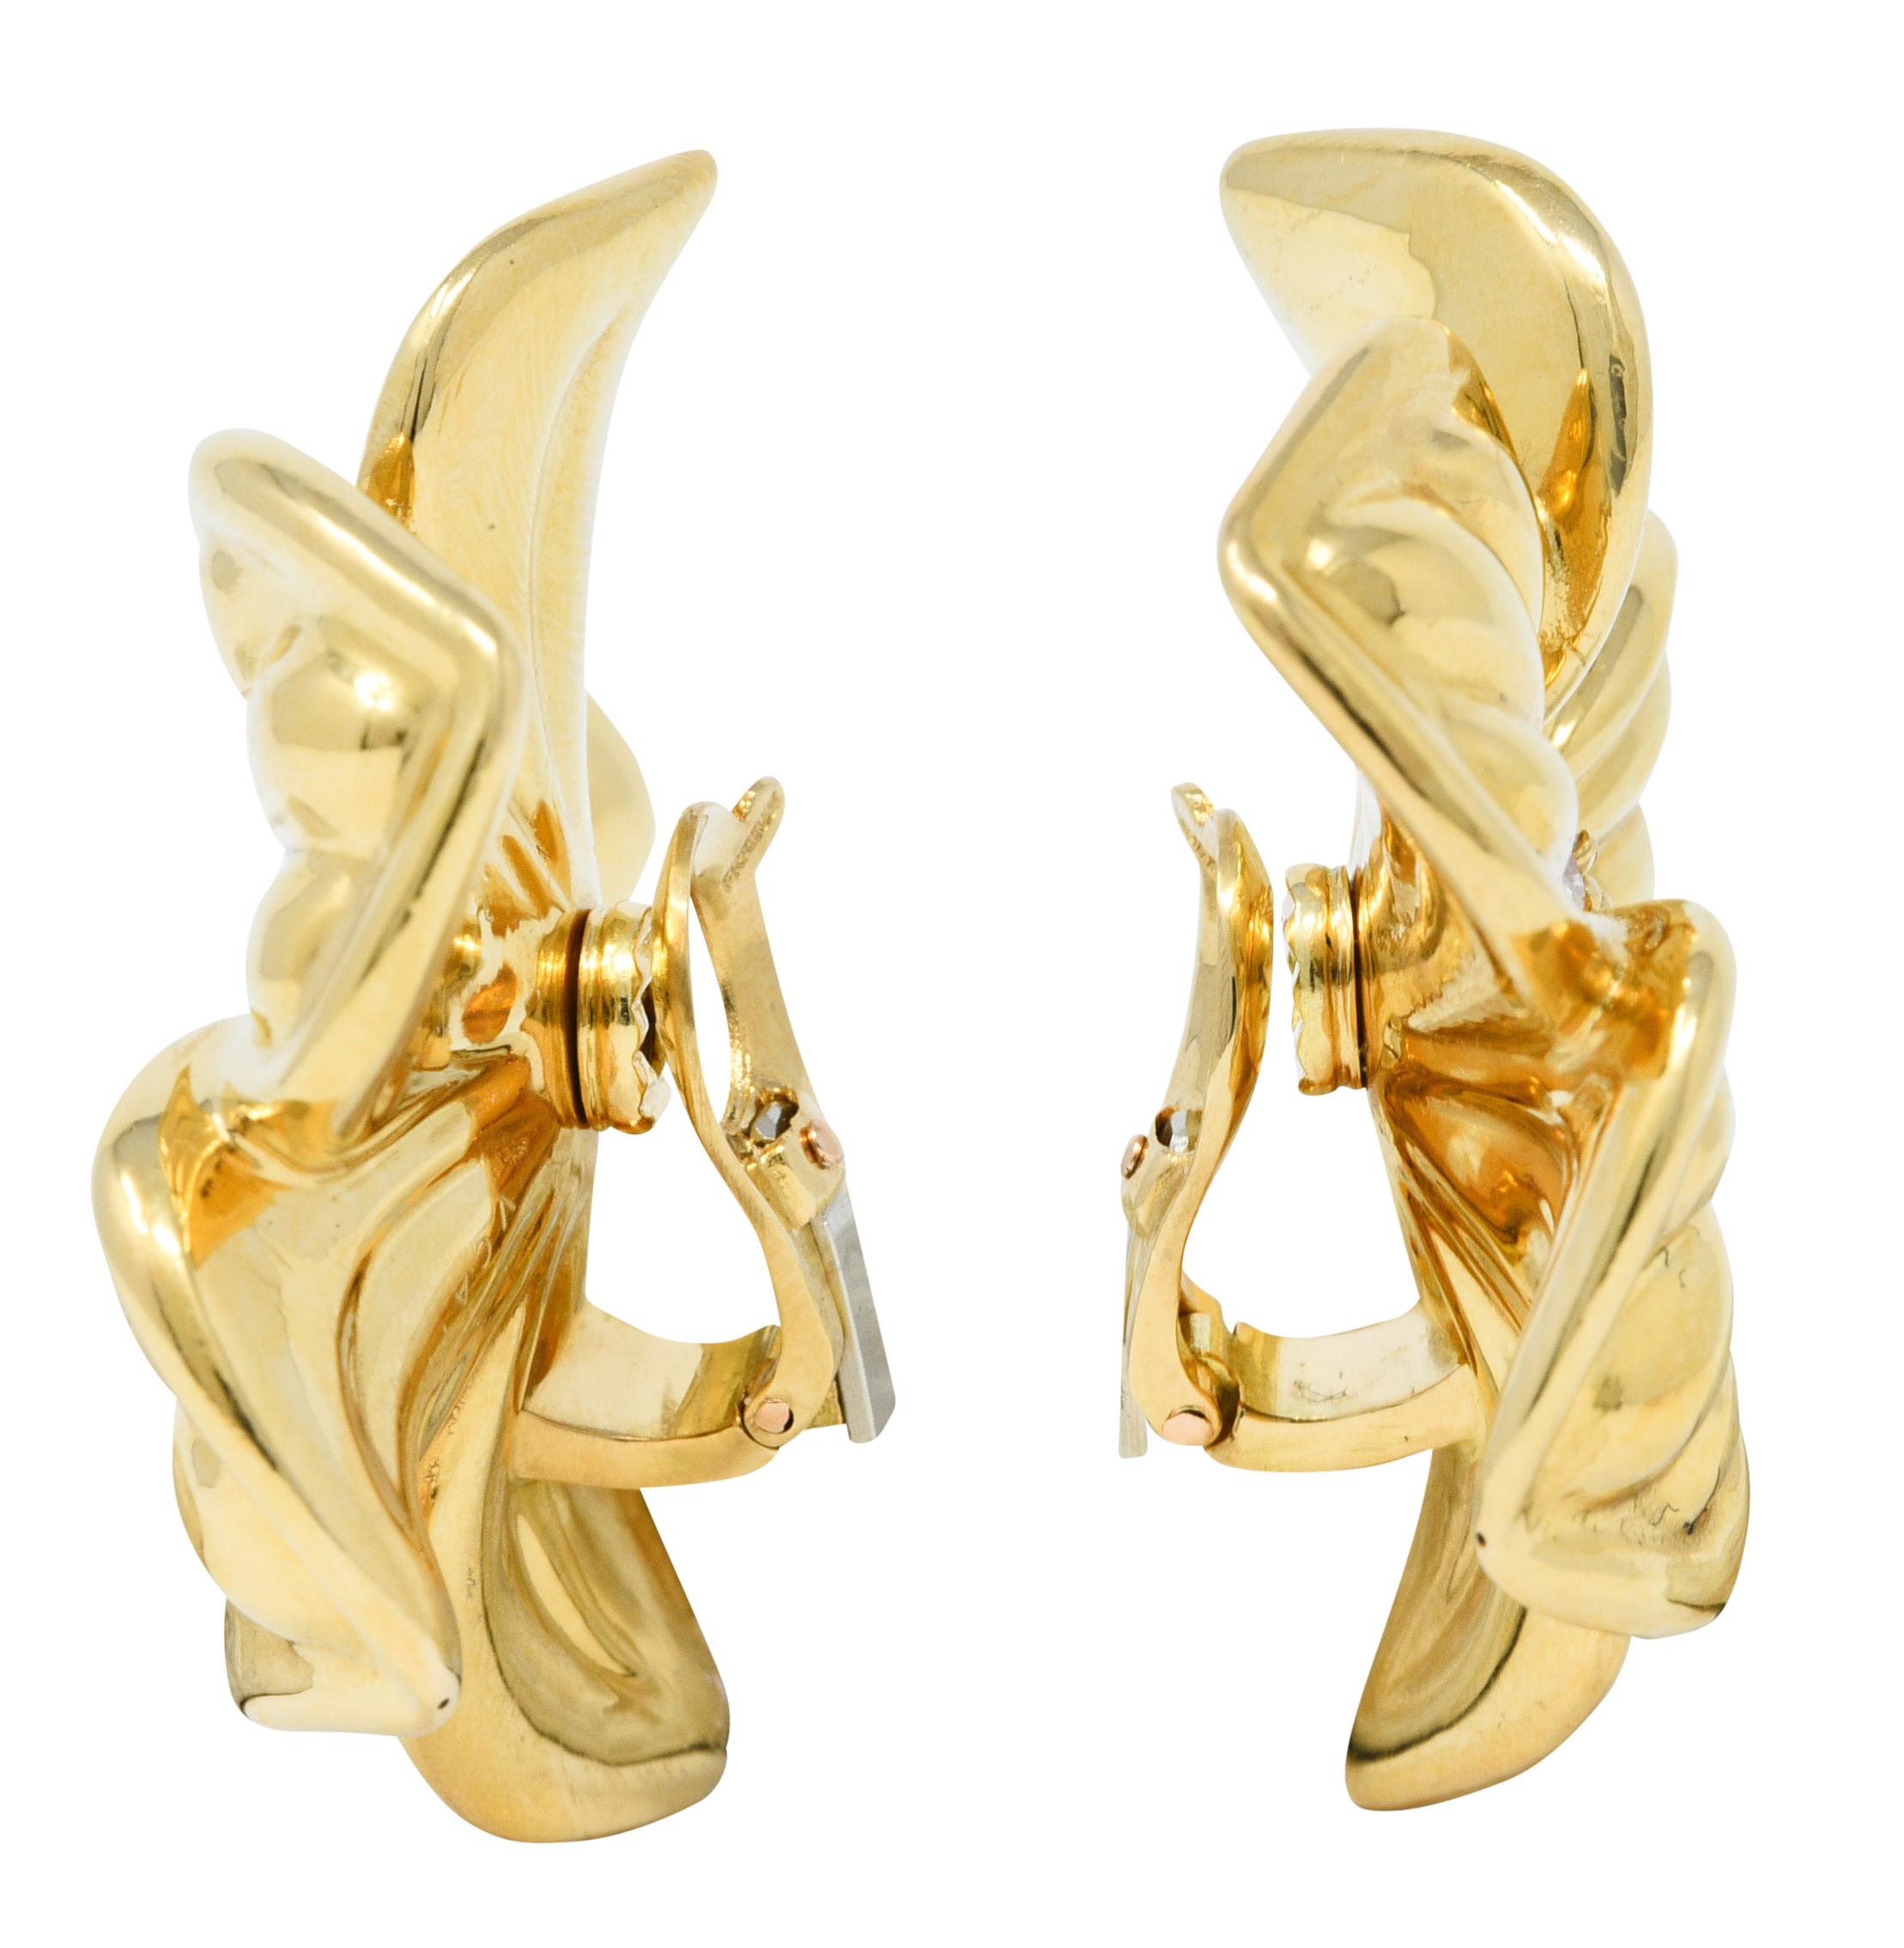 Ear-Clips are designed as stylized magnolia flowers with five deeply ridged petals

Centering round brilliant cut diamond clusters weighing in total approximately 0.85 carat - G/H color with VS clarity

Completed by hinged omega backs

Stamped 750